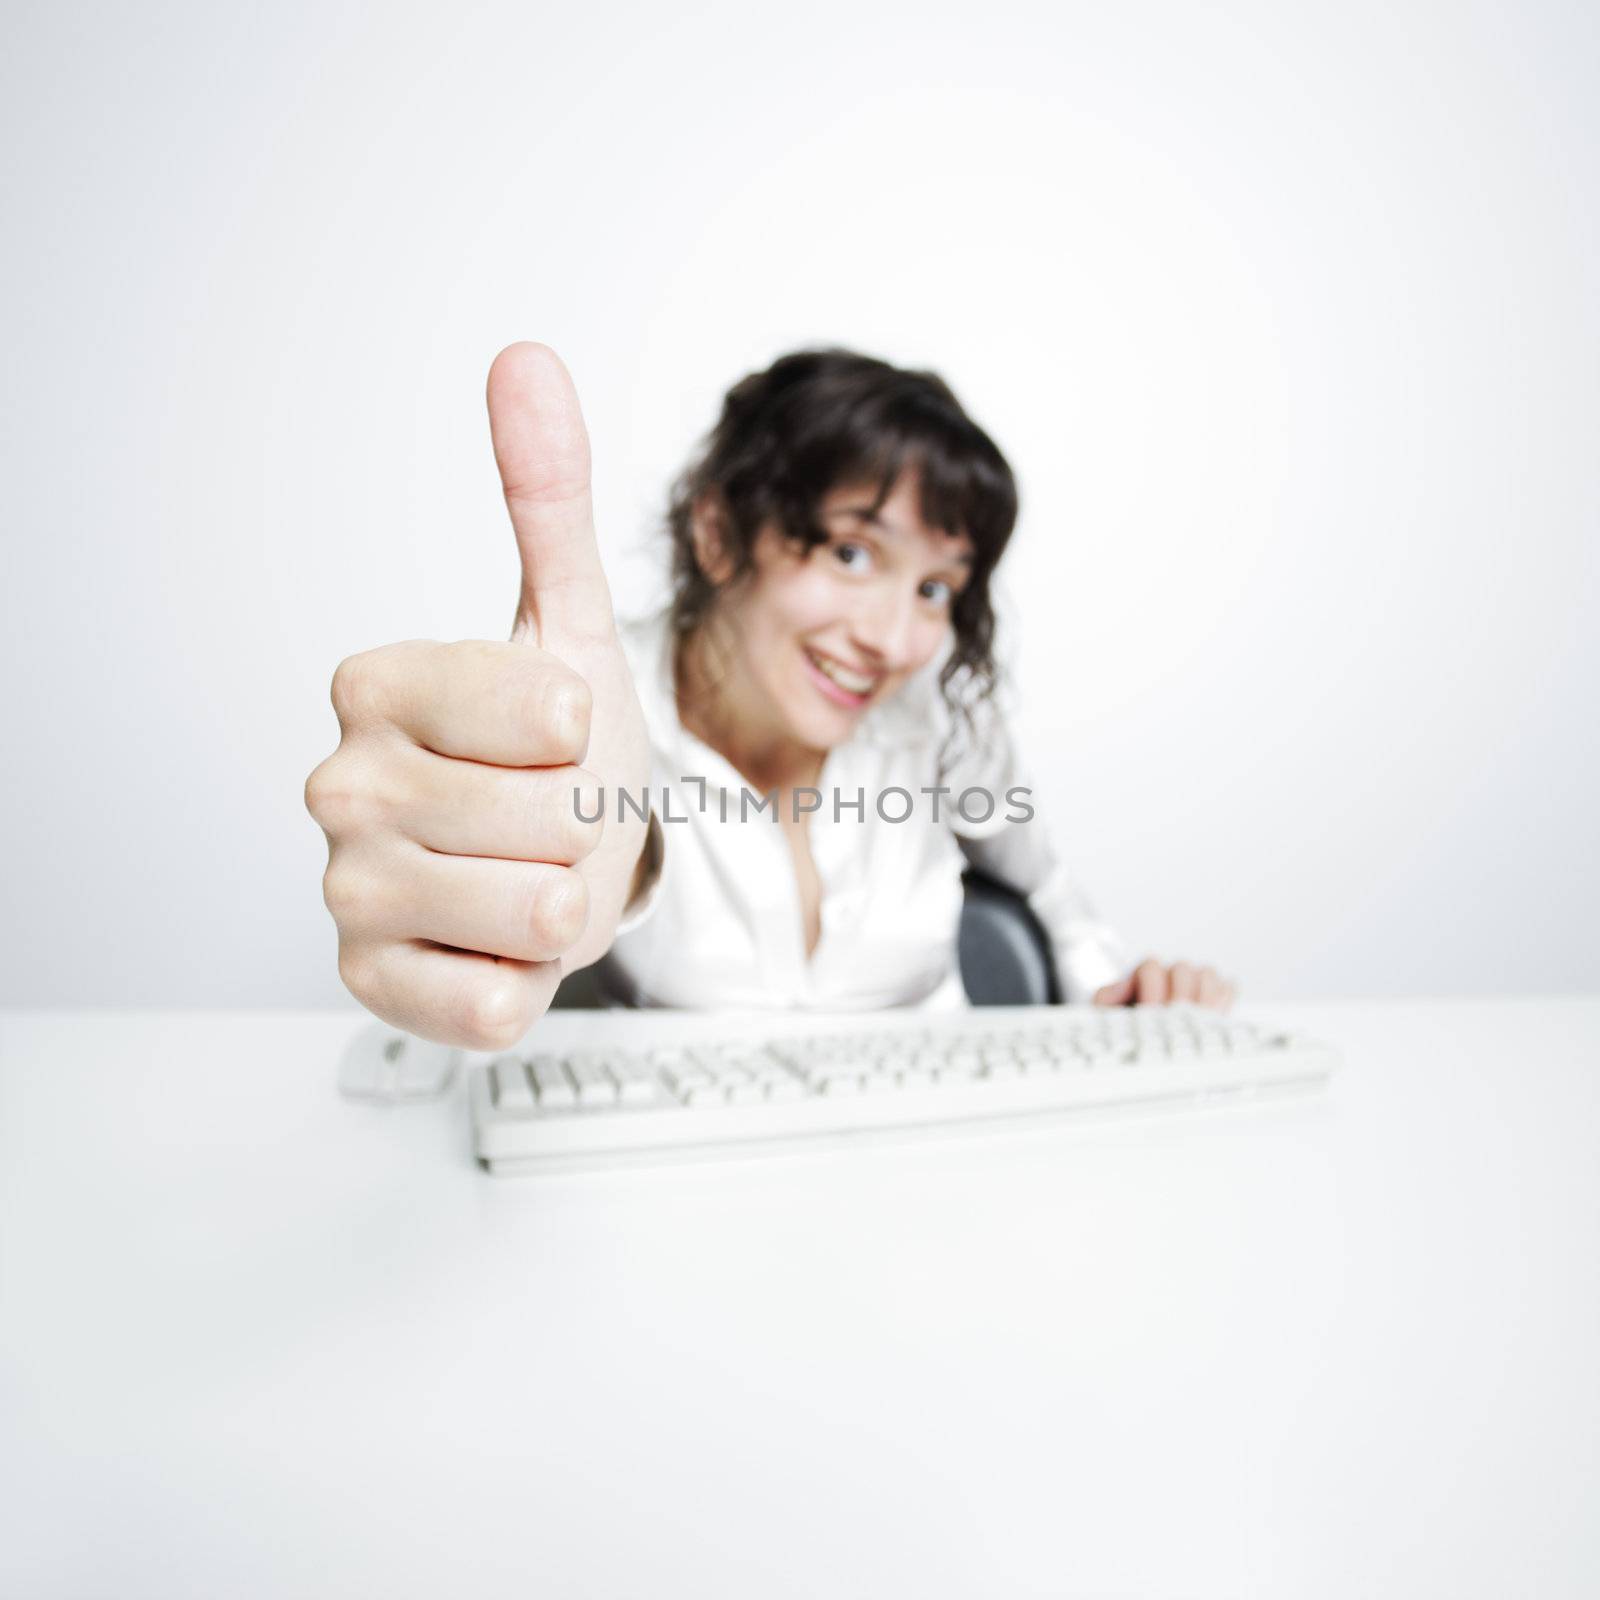 thumbs up shown by a happy, smiling young woman working at her office desk